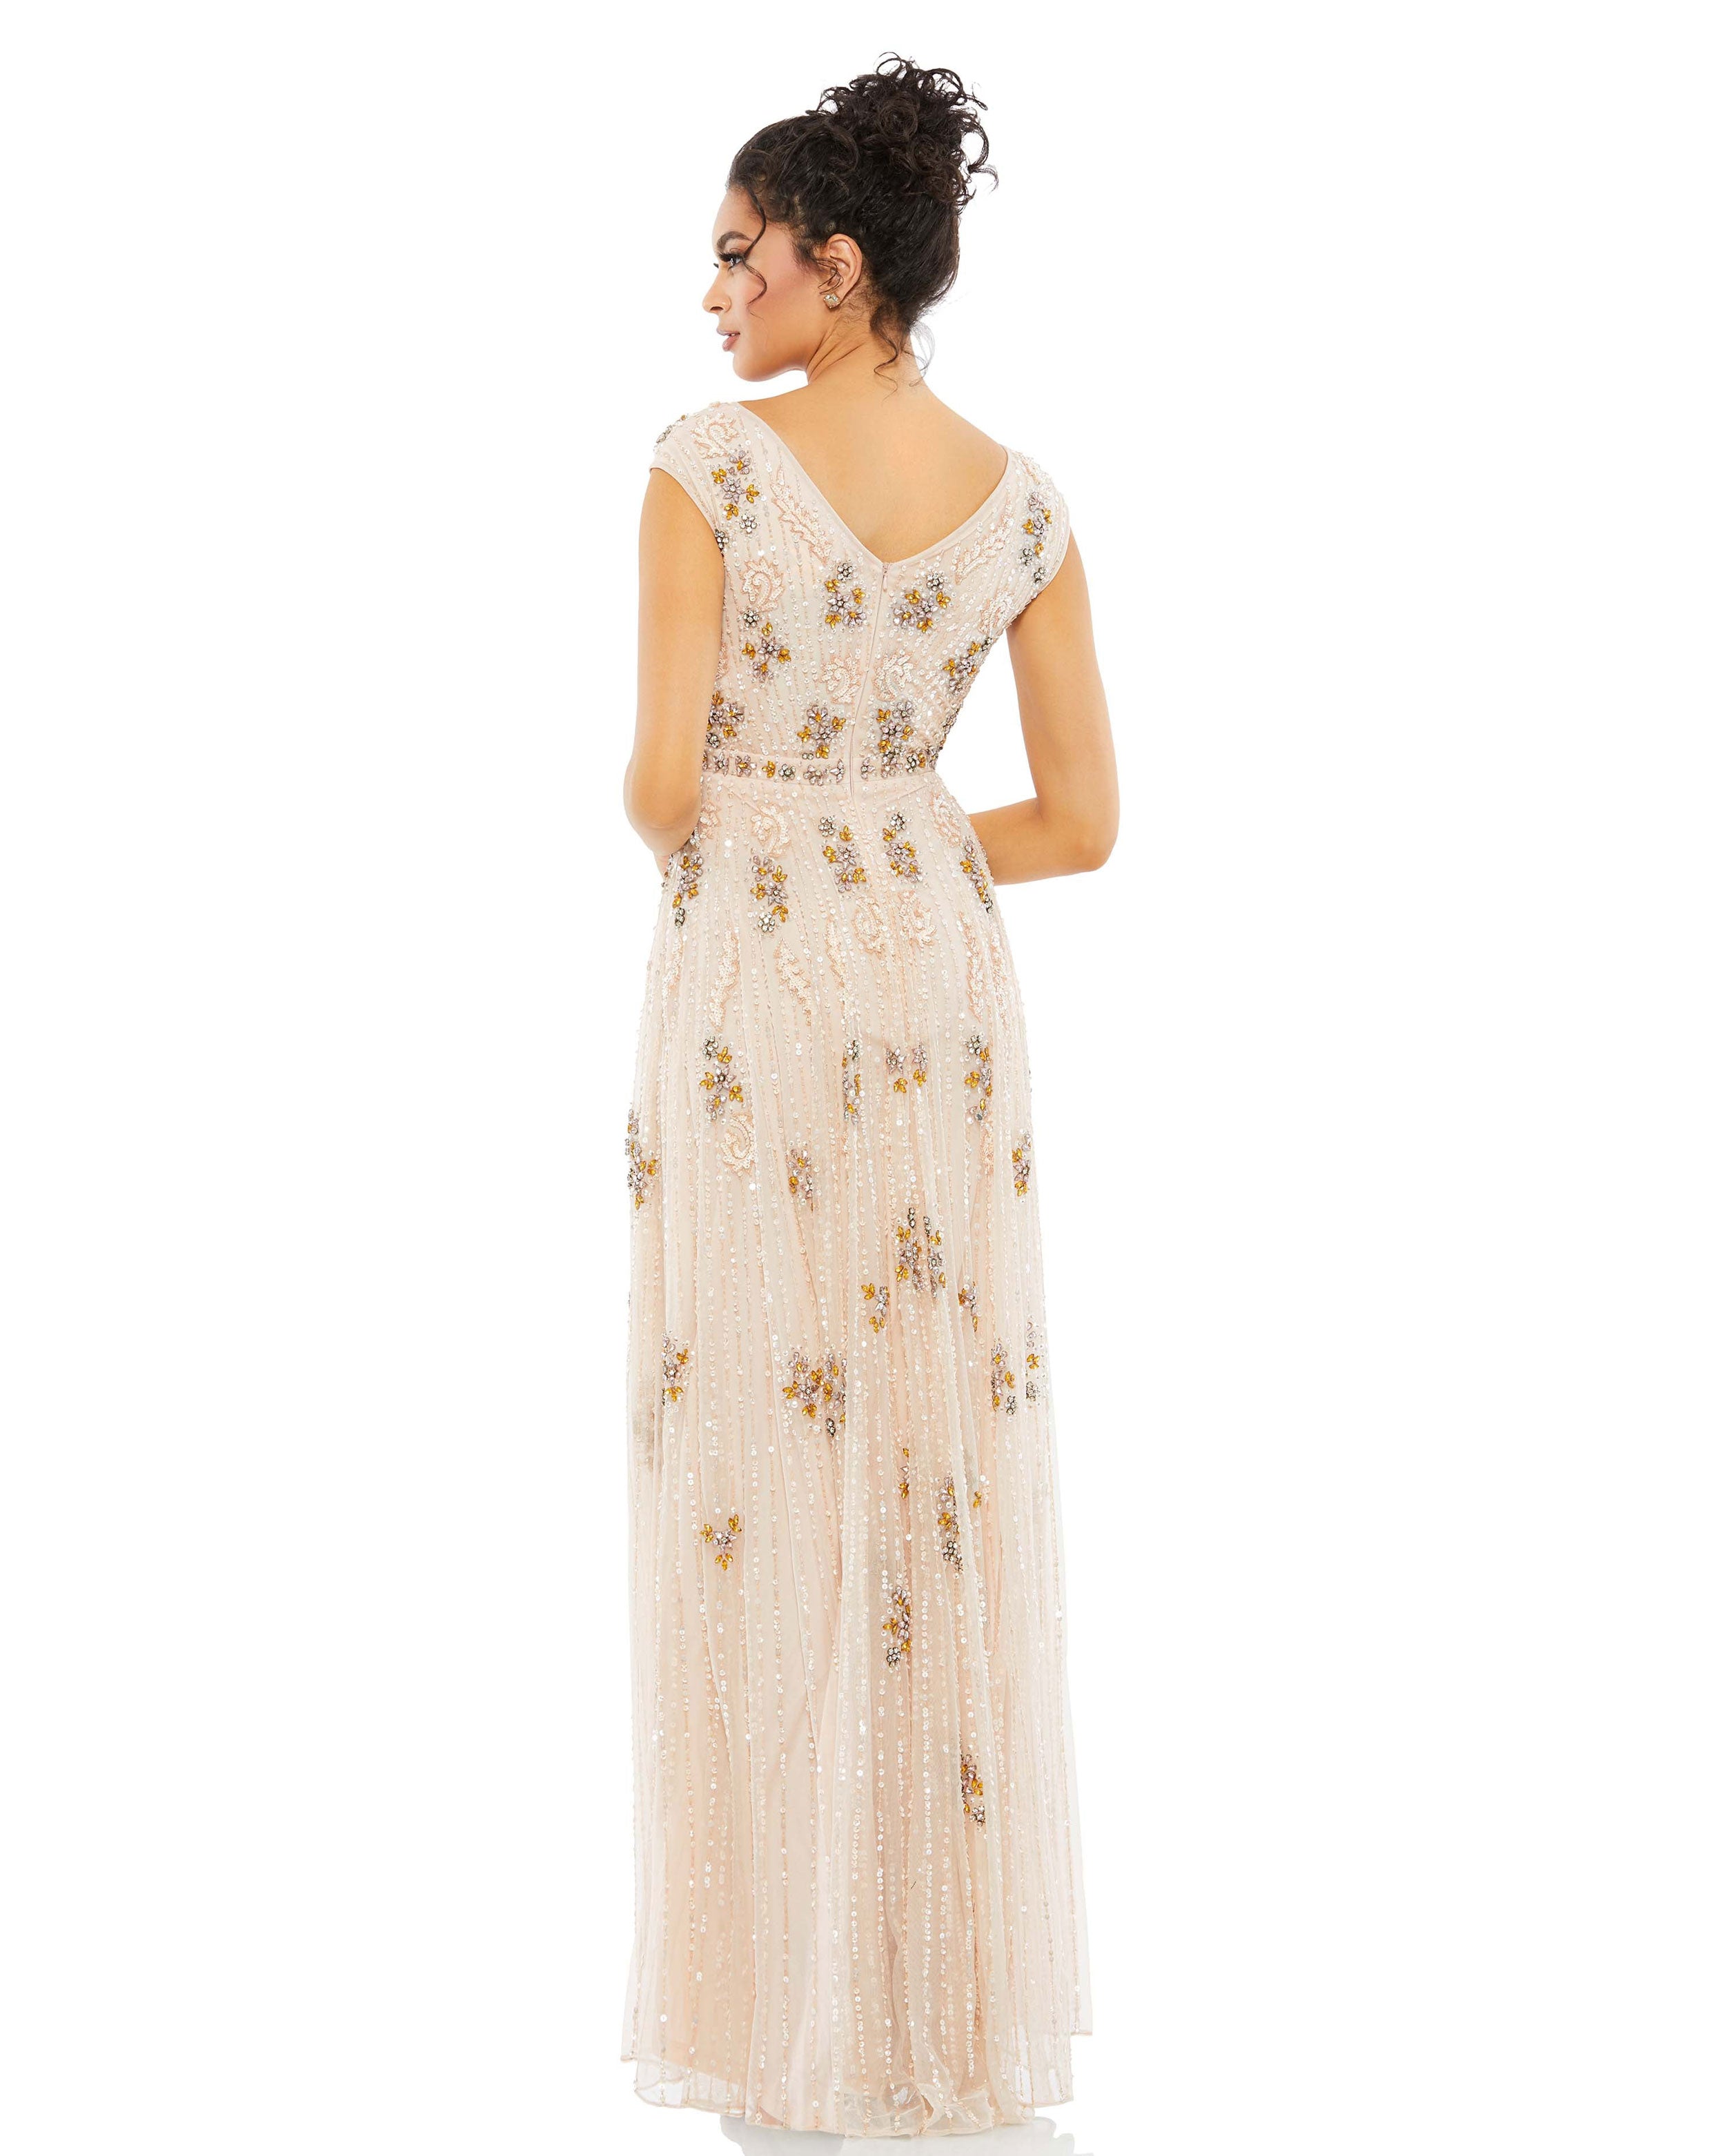 Embellished Wrap Over Cap Sleeve A-Line Gown